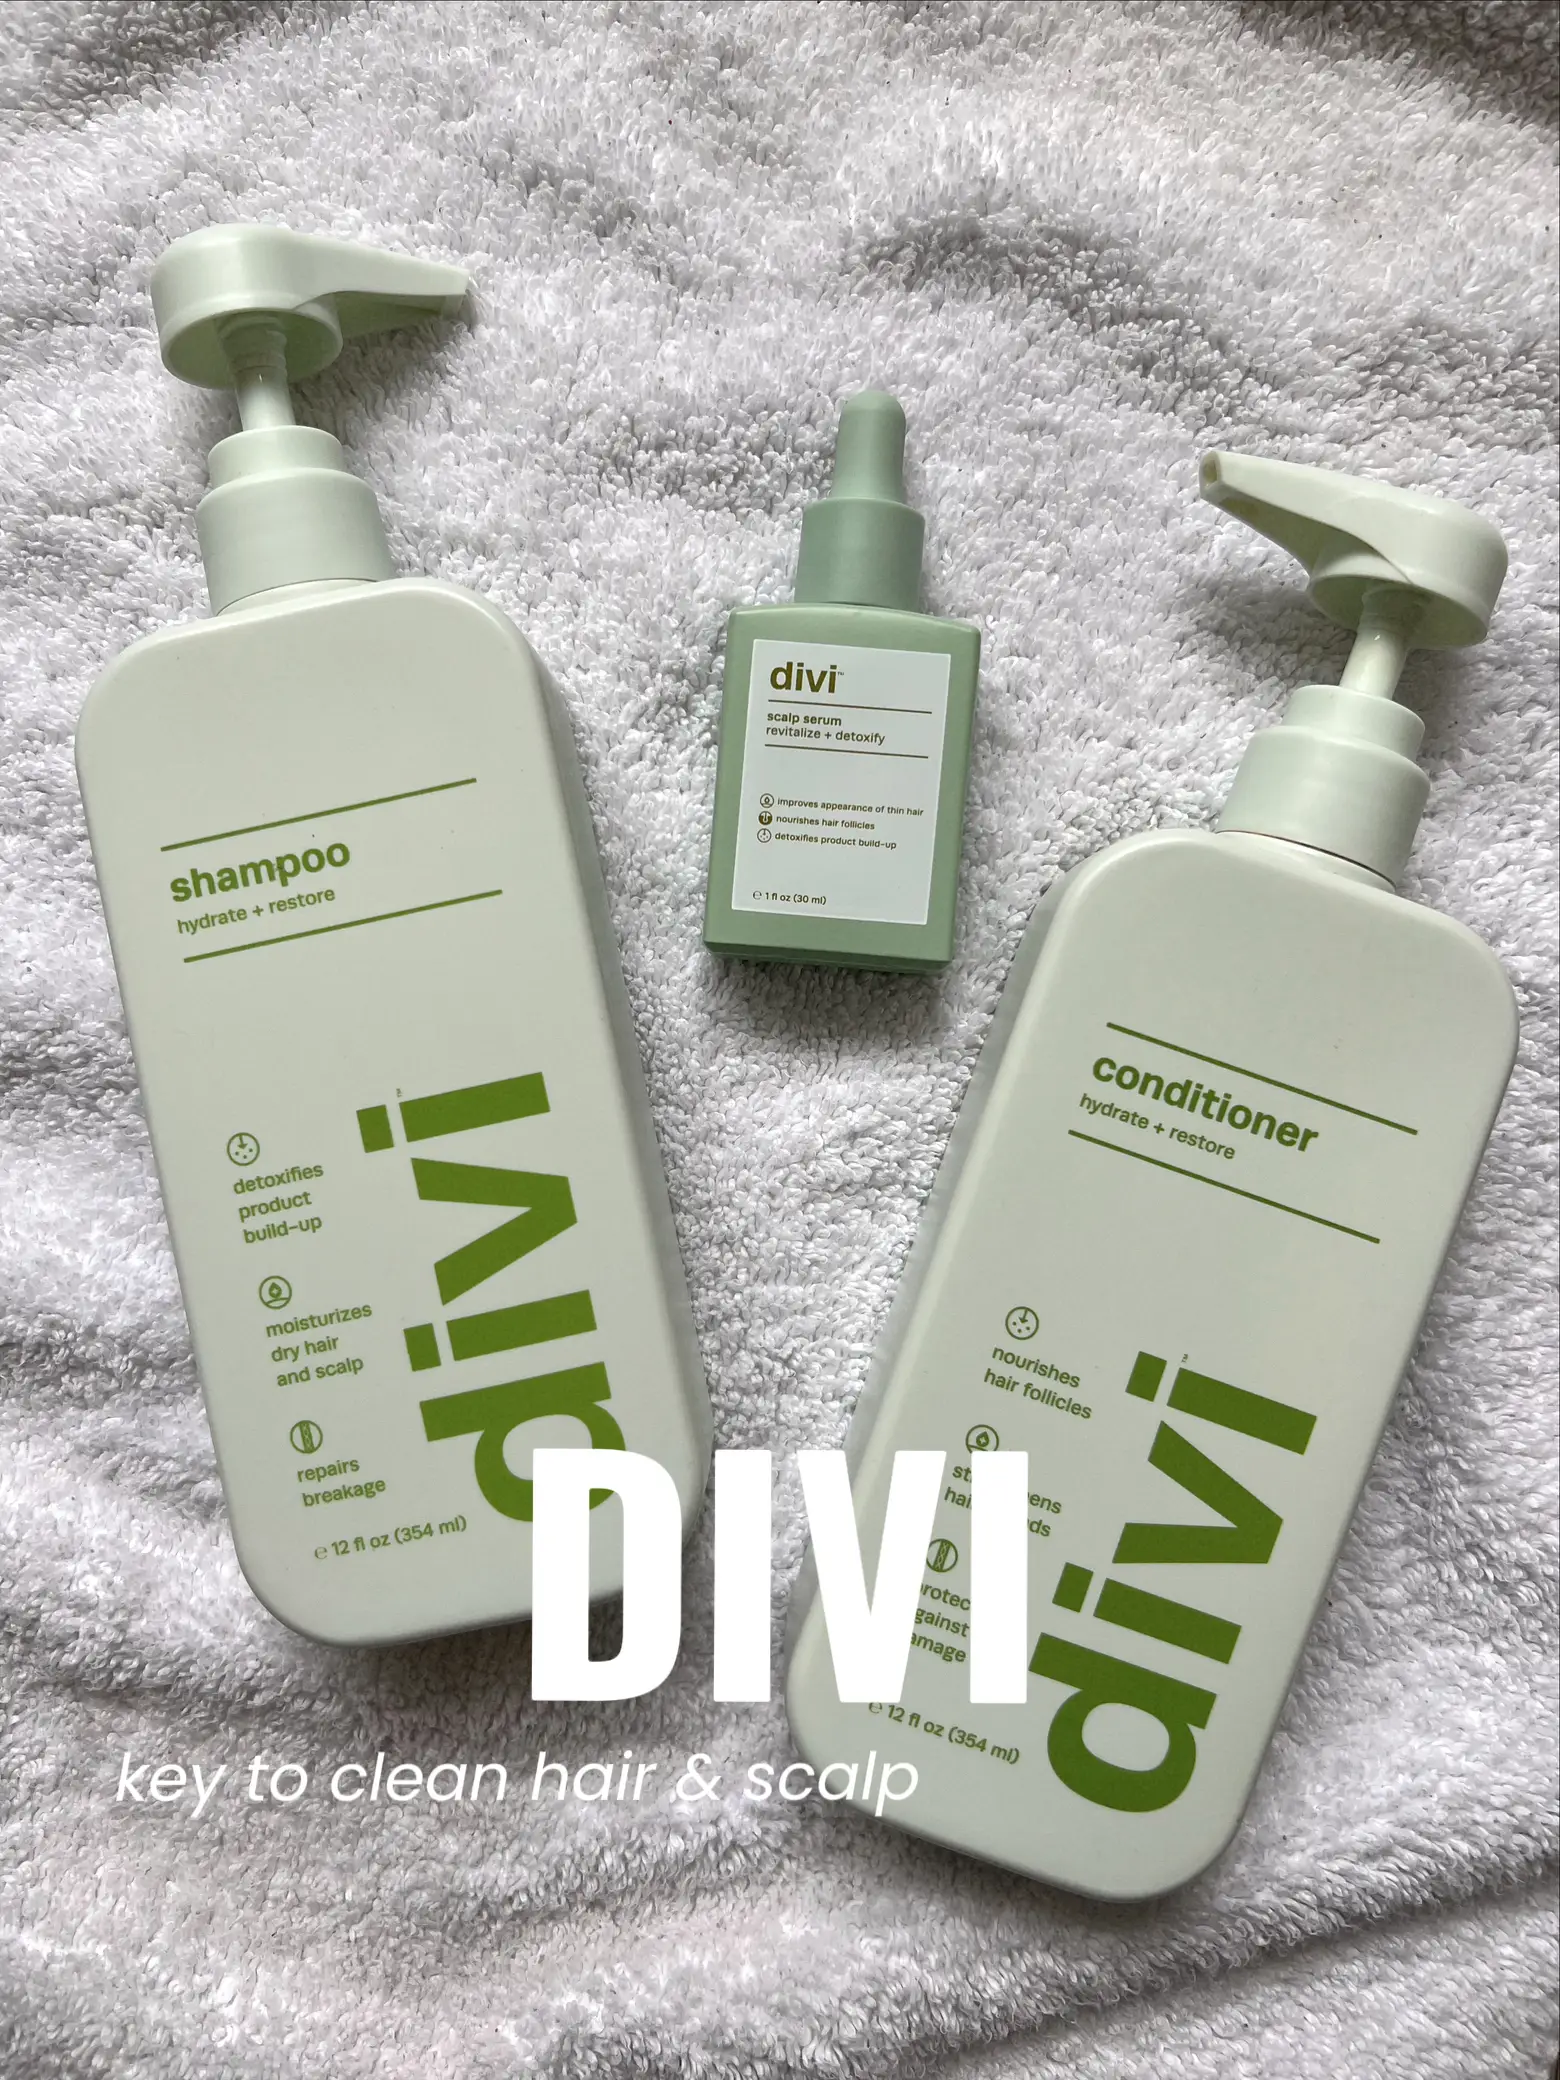 Divi Scalp Serum, Revitalize and Detoxify, Aids Against hair-thinning